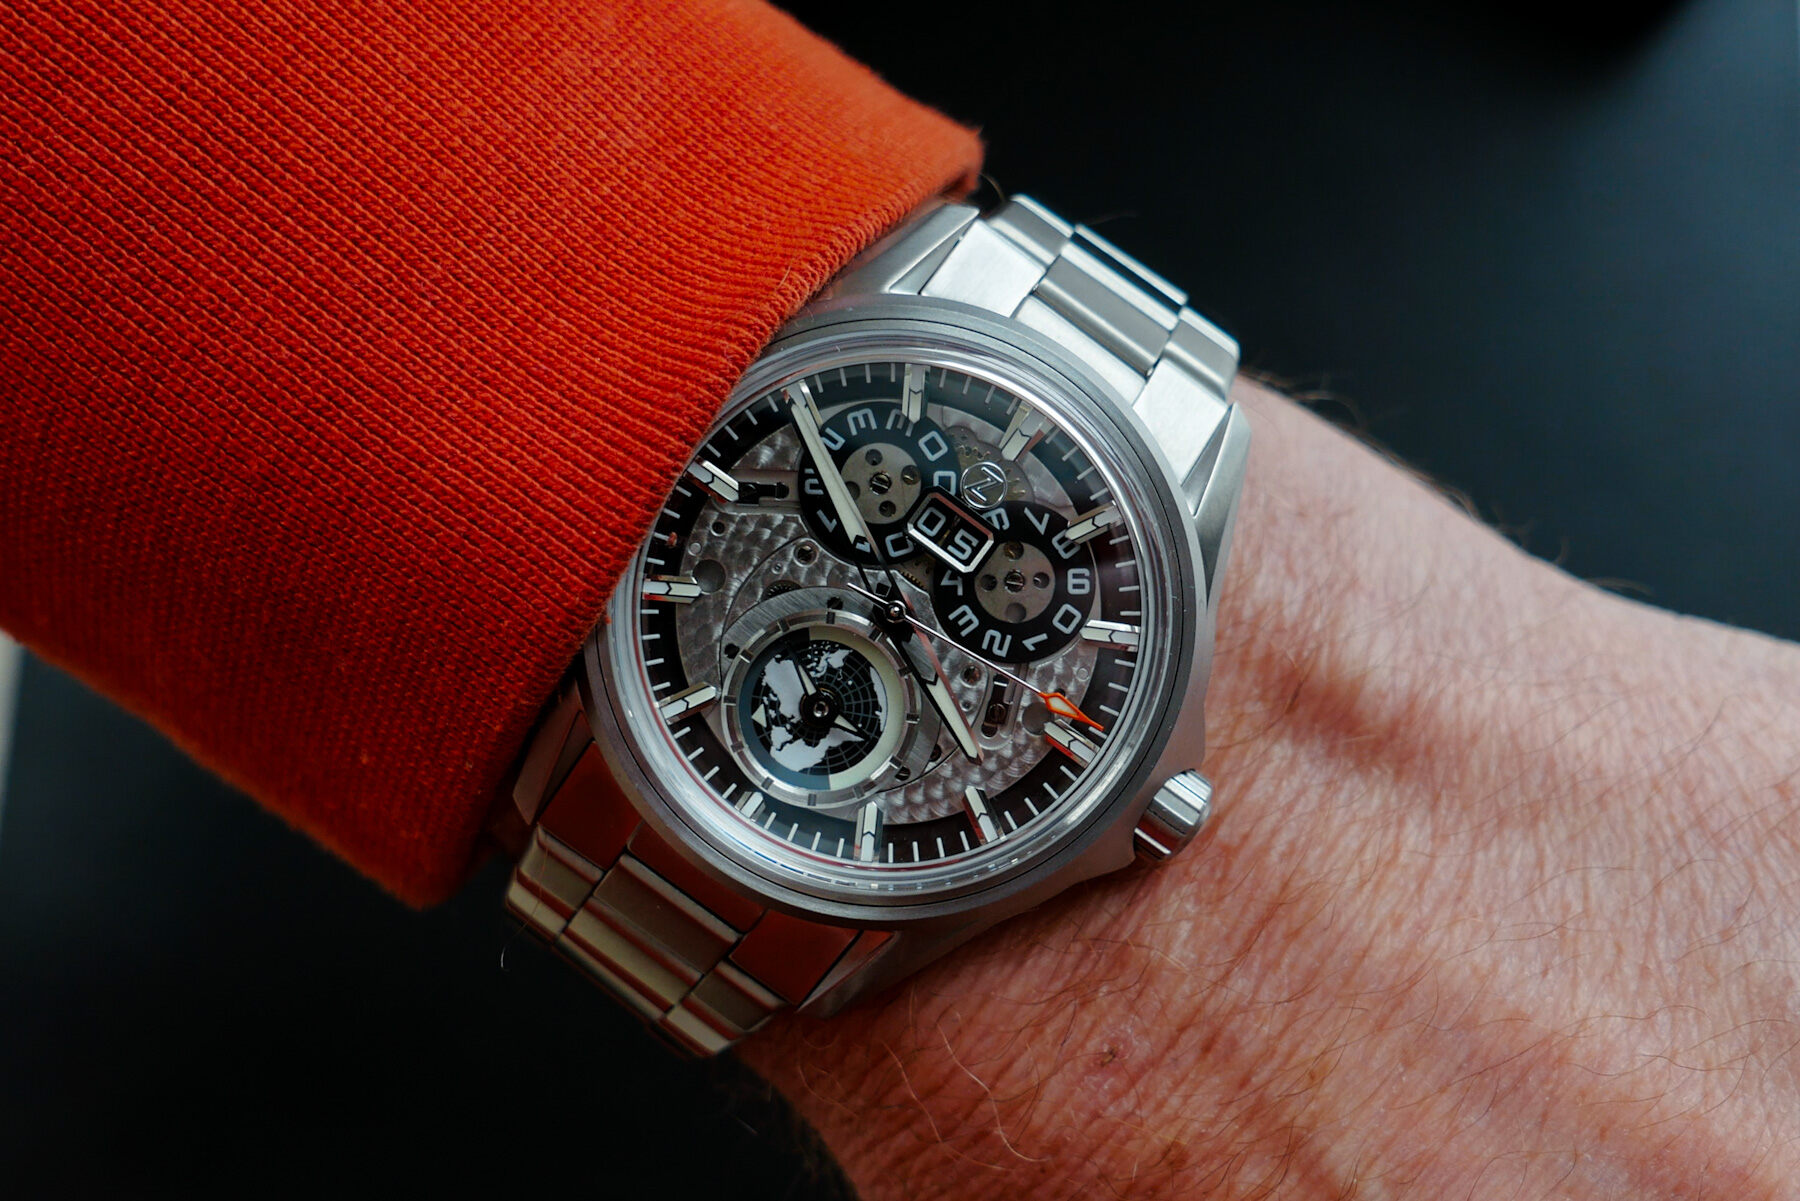 Hands-on with the Zelos Spearfish Dual Time